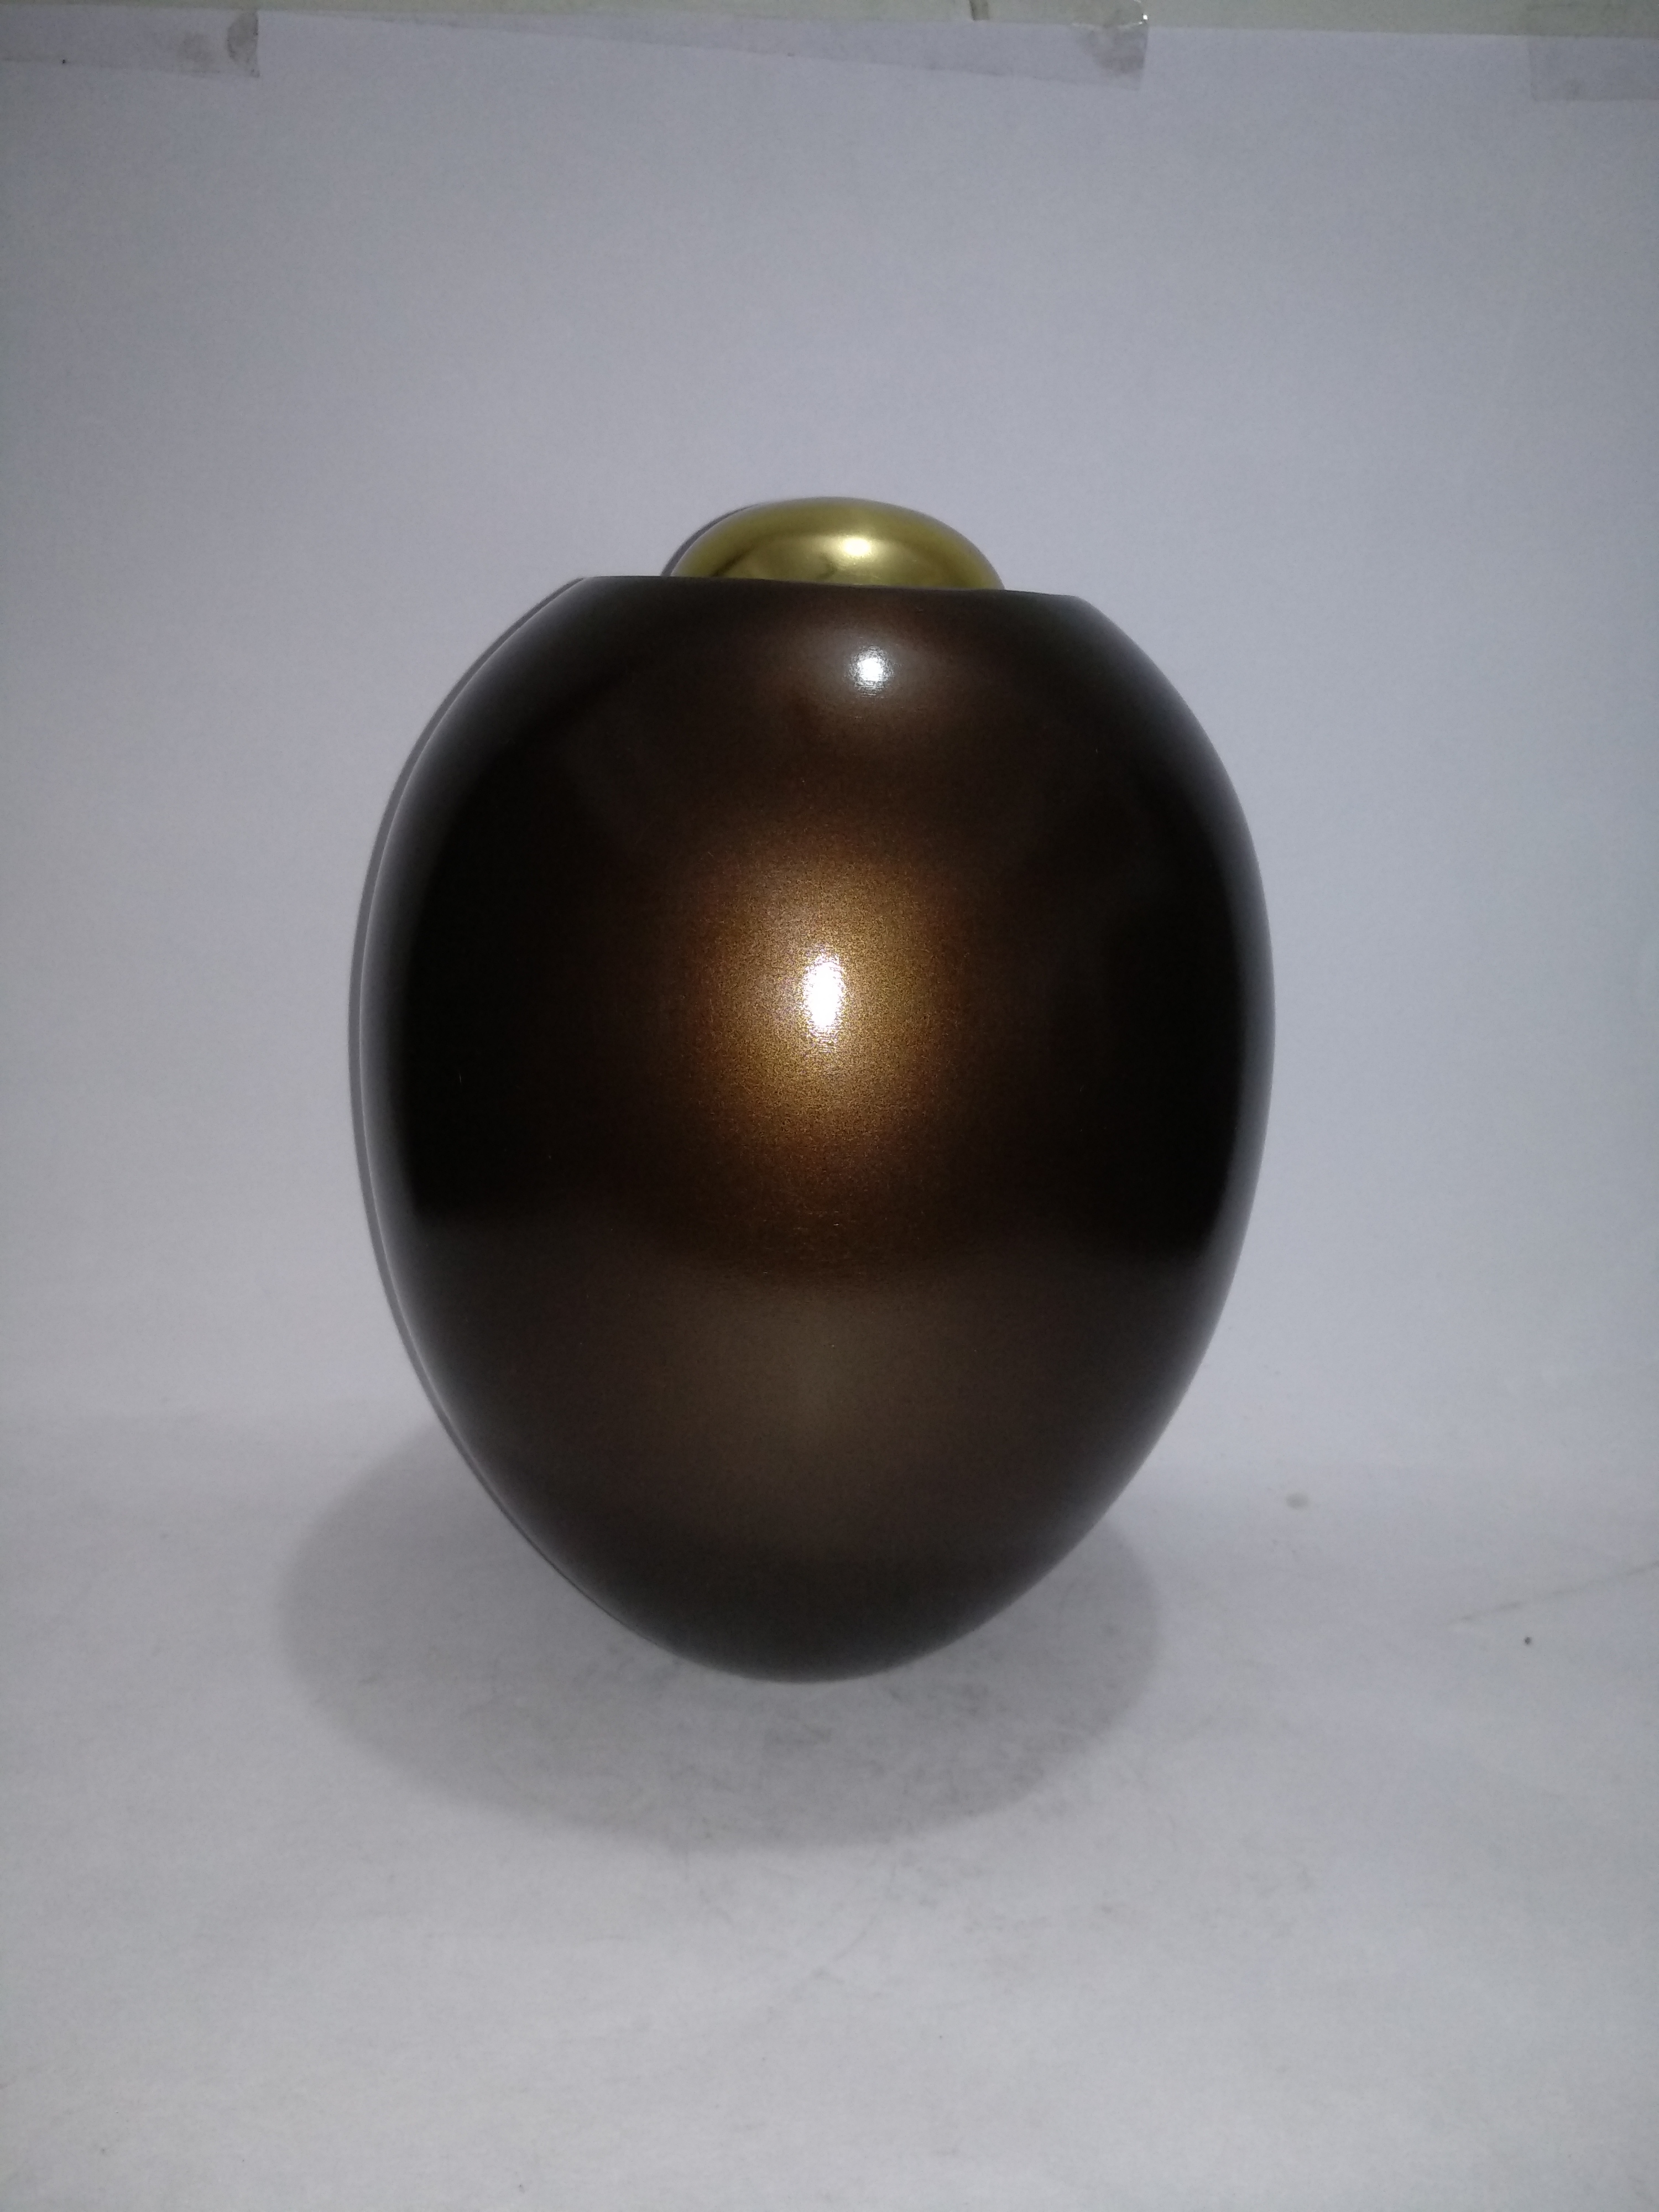 Mother of Pearl Cremation Urn Large